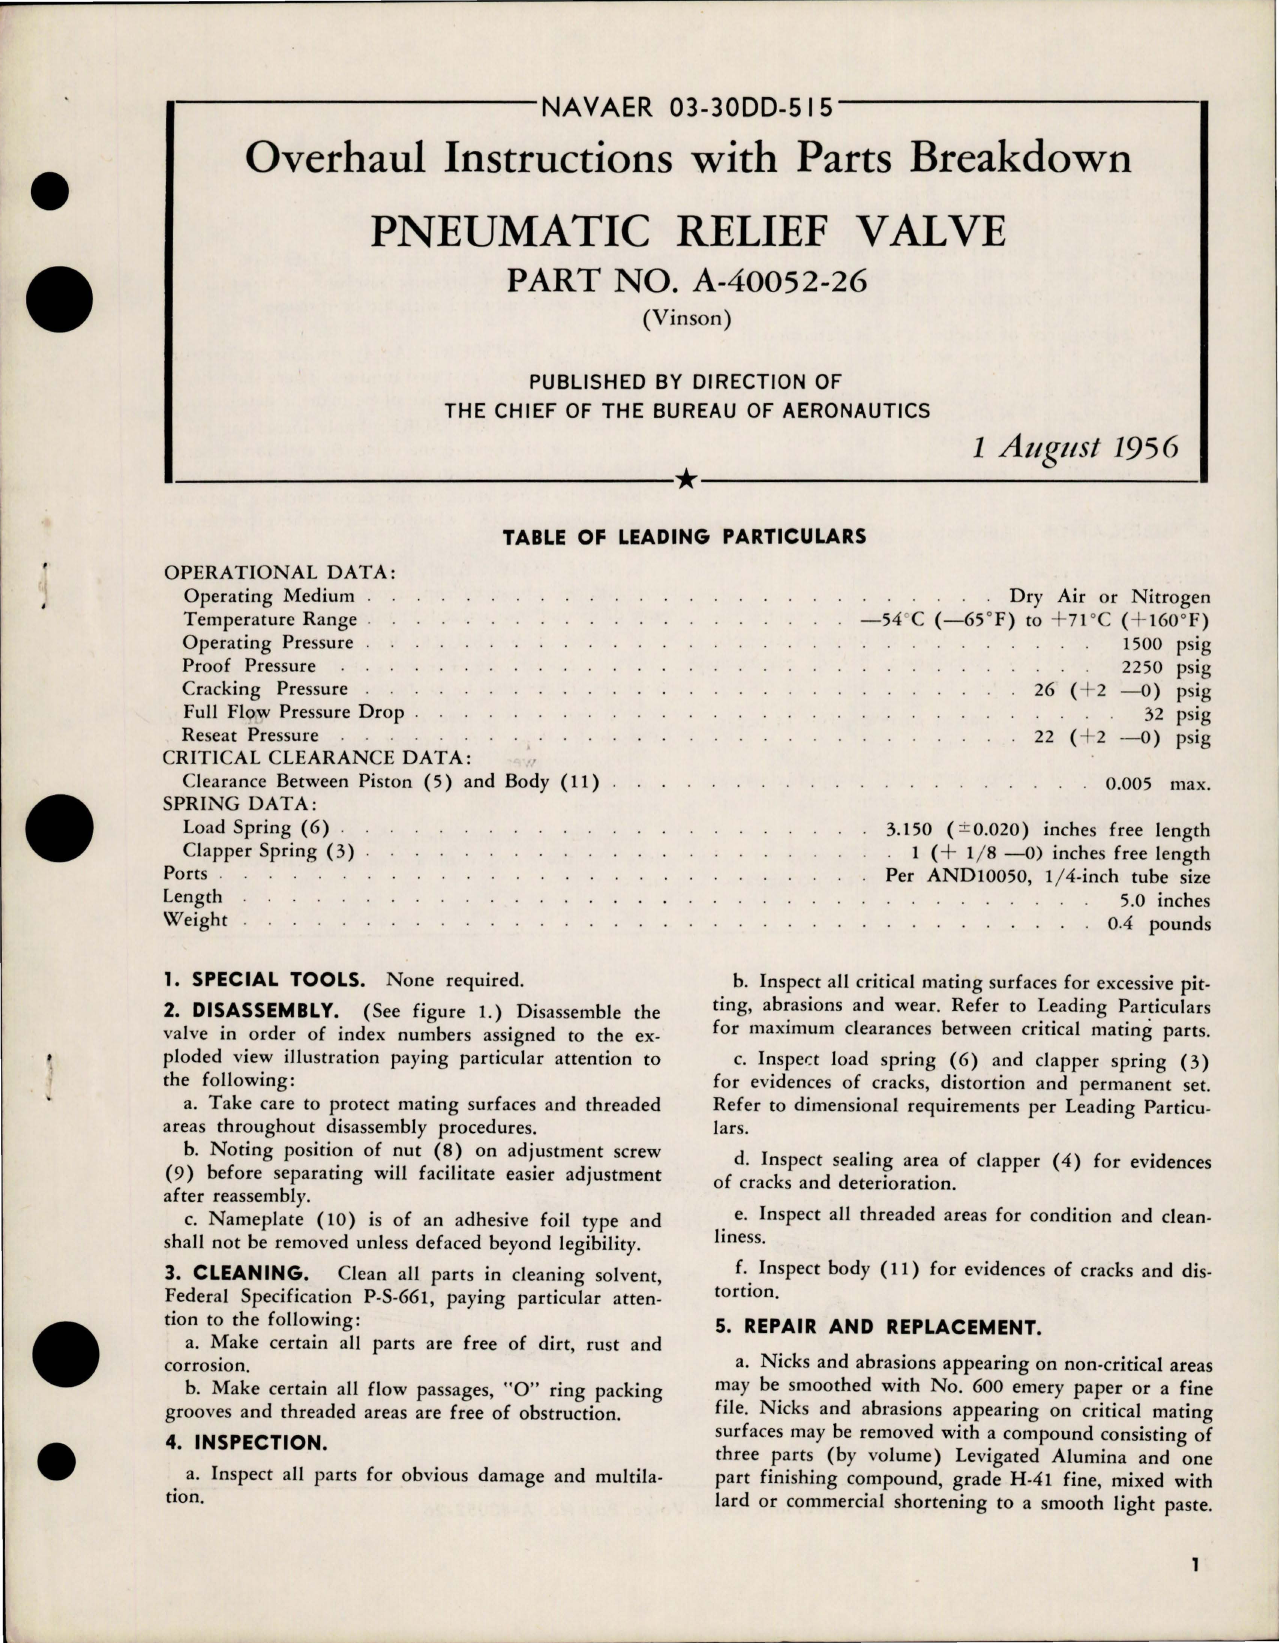 Sample page 1 from AirCorps Library document: Overhaul Instructions with Parts Breakdown for Pneumatic Relief Valve - Part A-40052-26 